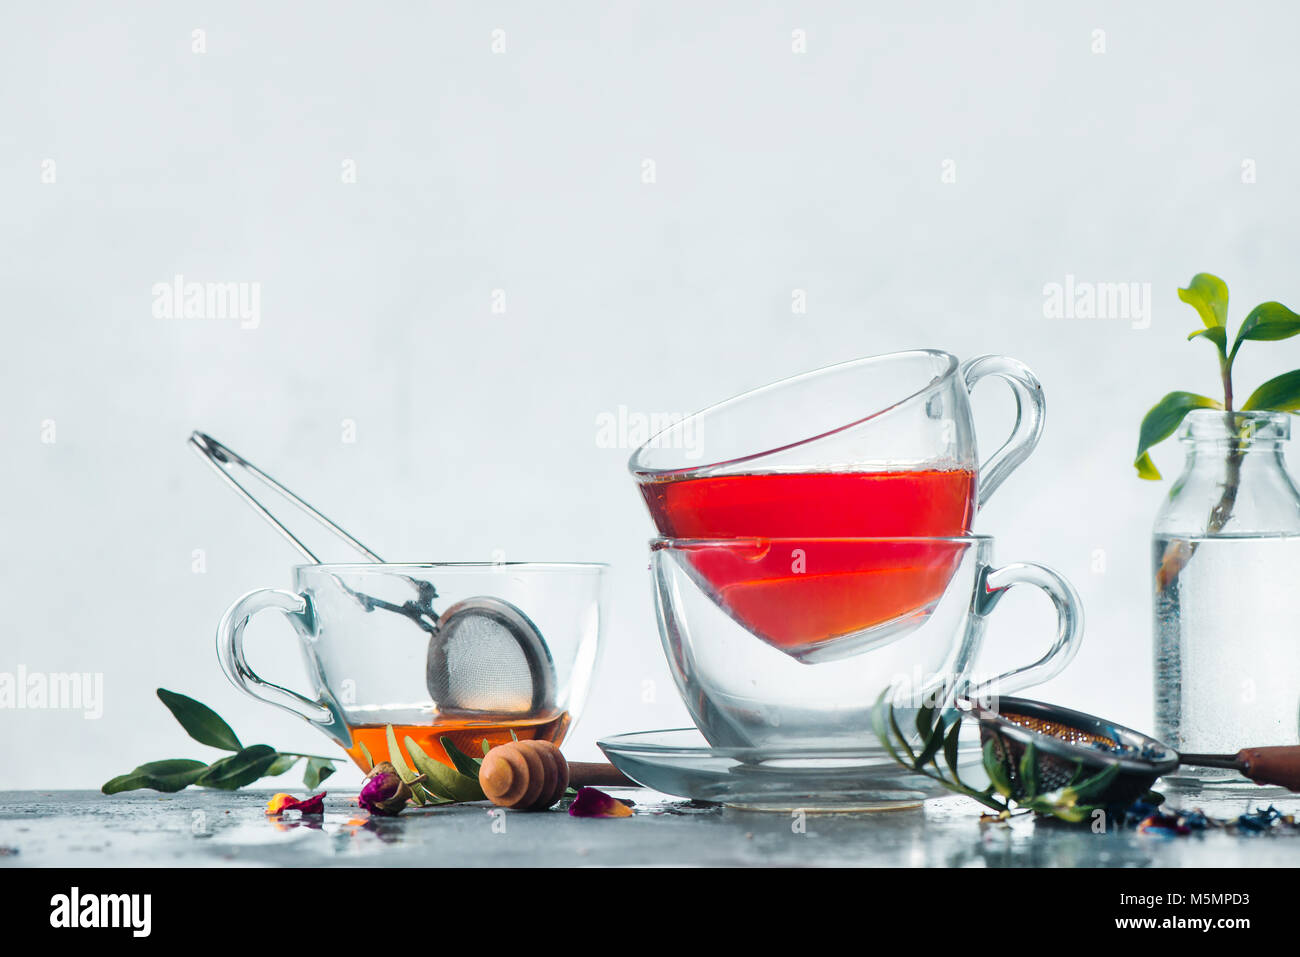 Stack of glass cups of tea on a white background with a honey spoon, tea strainer, fresh green leaves, flowers and copy space. Brewing herbal tea concept. High-key spring still life with copy space. Stock Photo